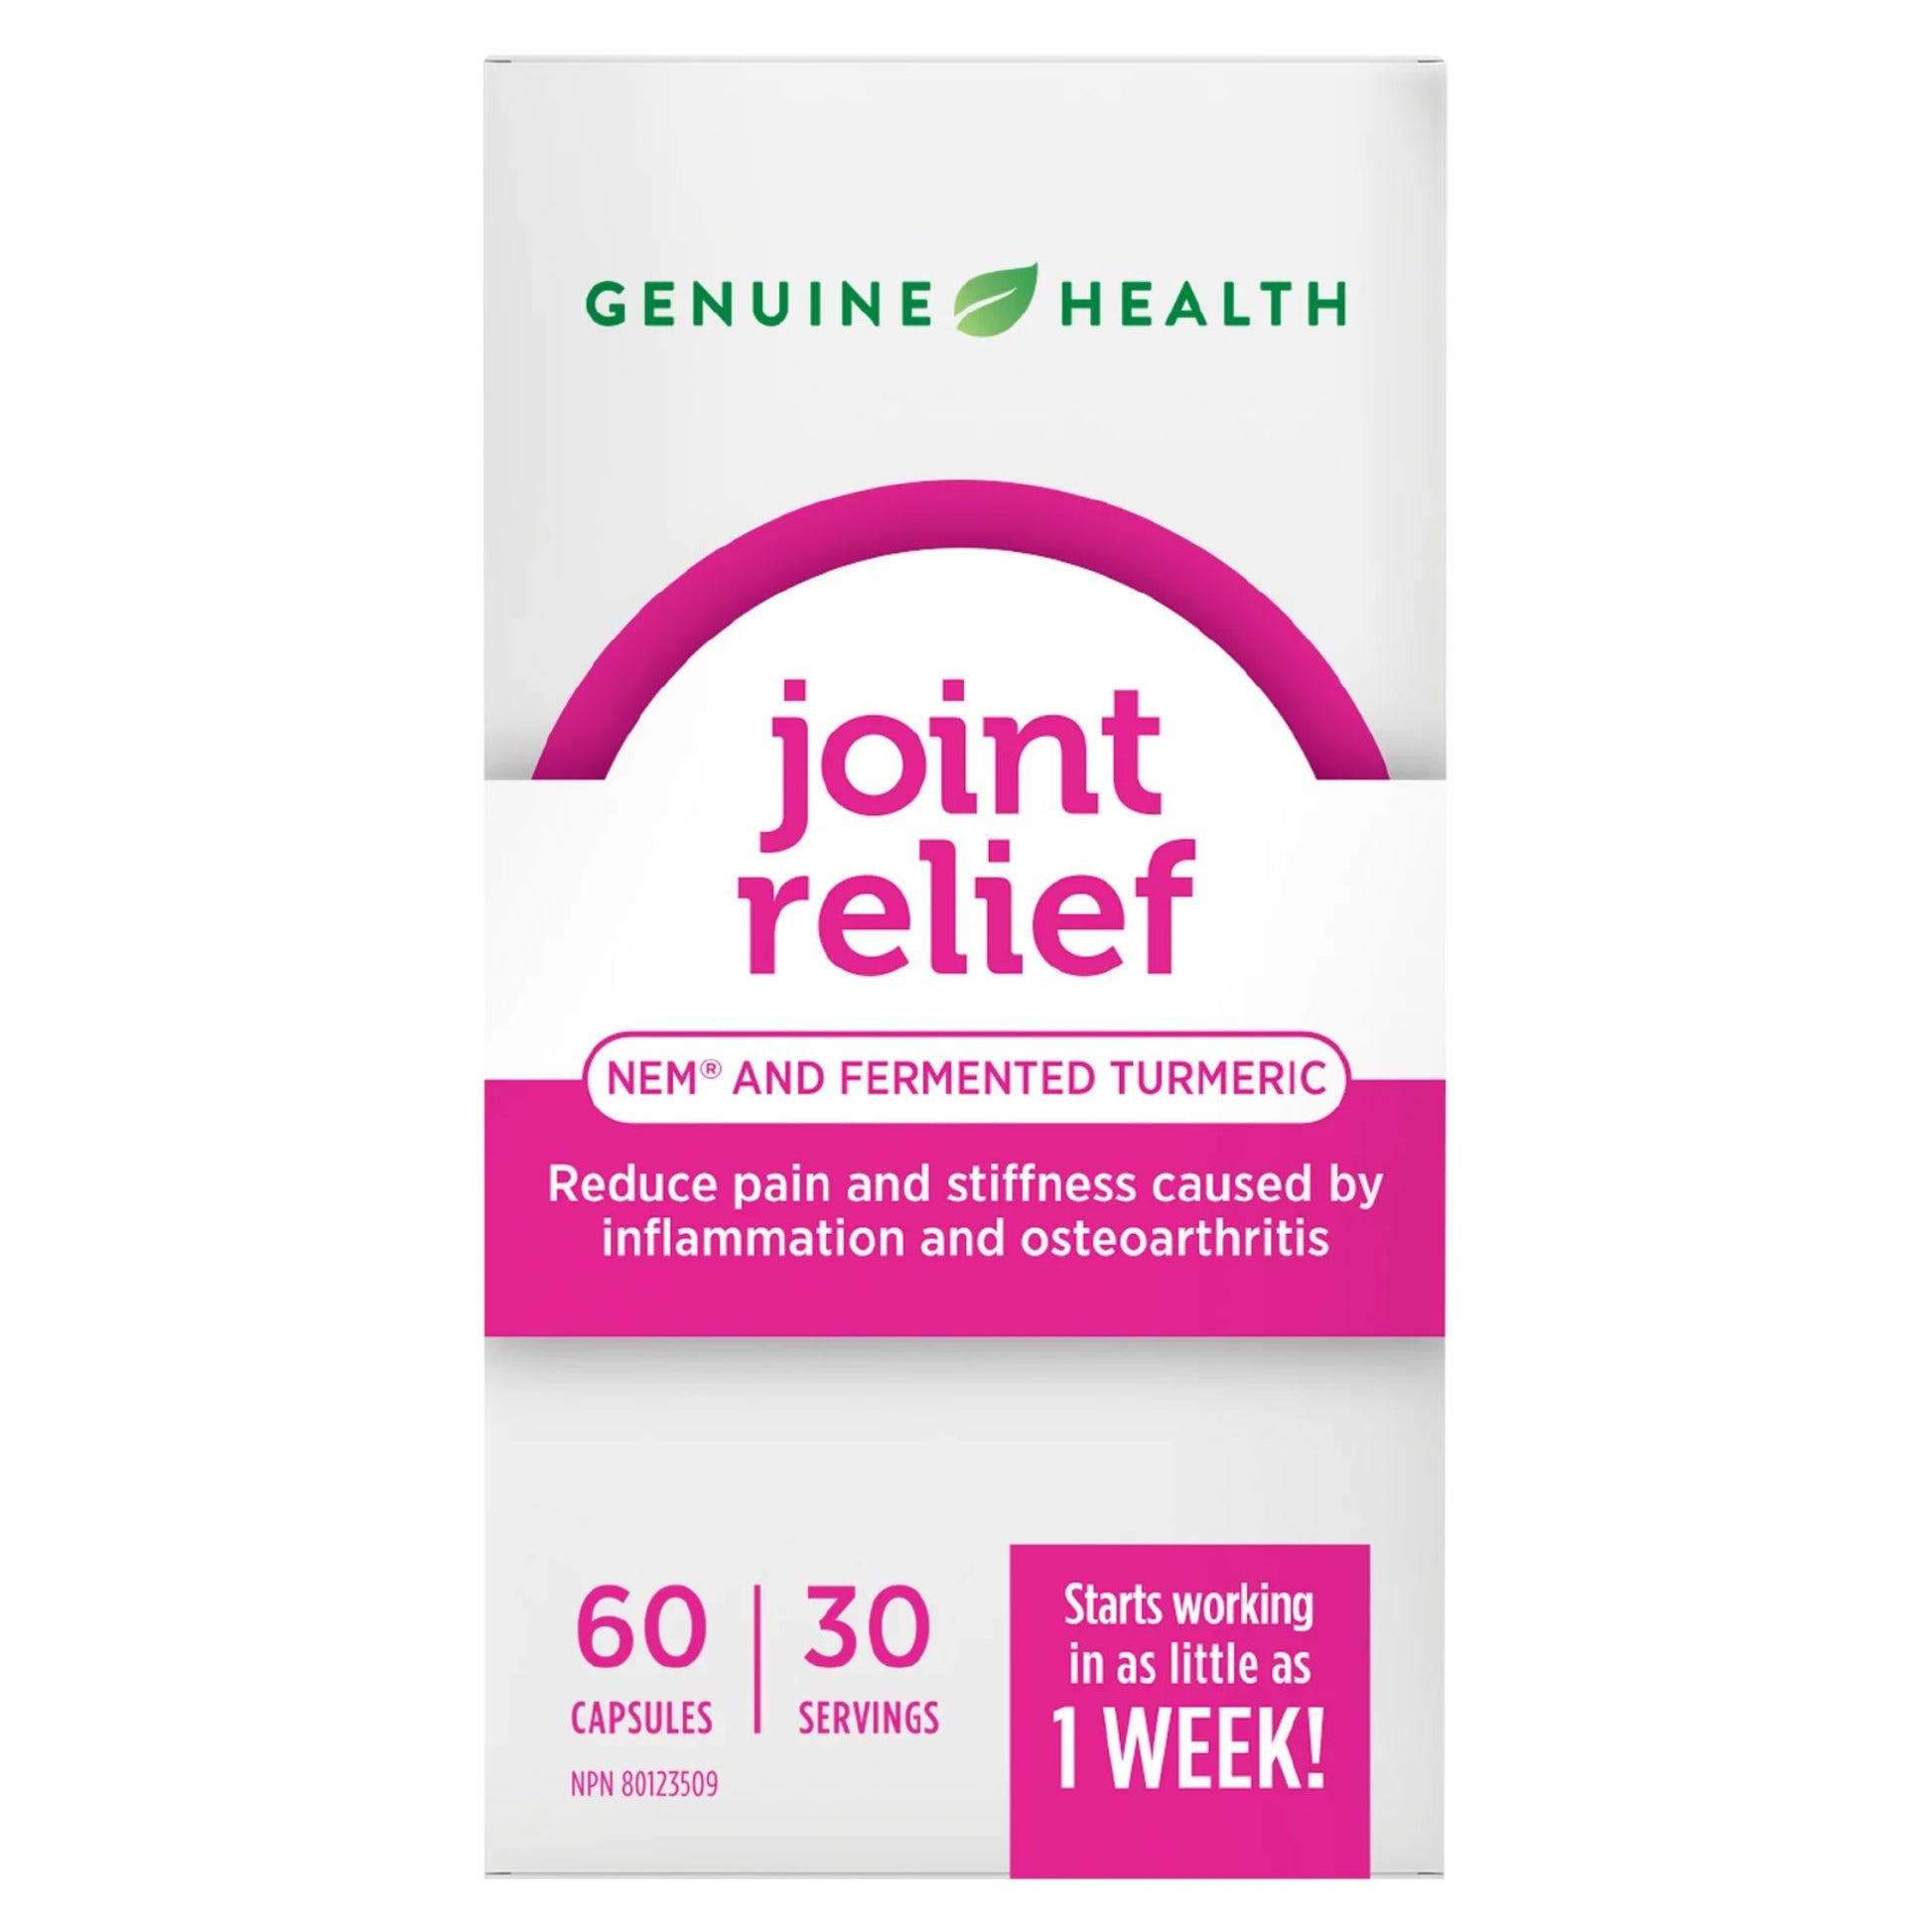 Genuine Health Joint Relief NEM and Fermented Turmeric 60 capsules